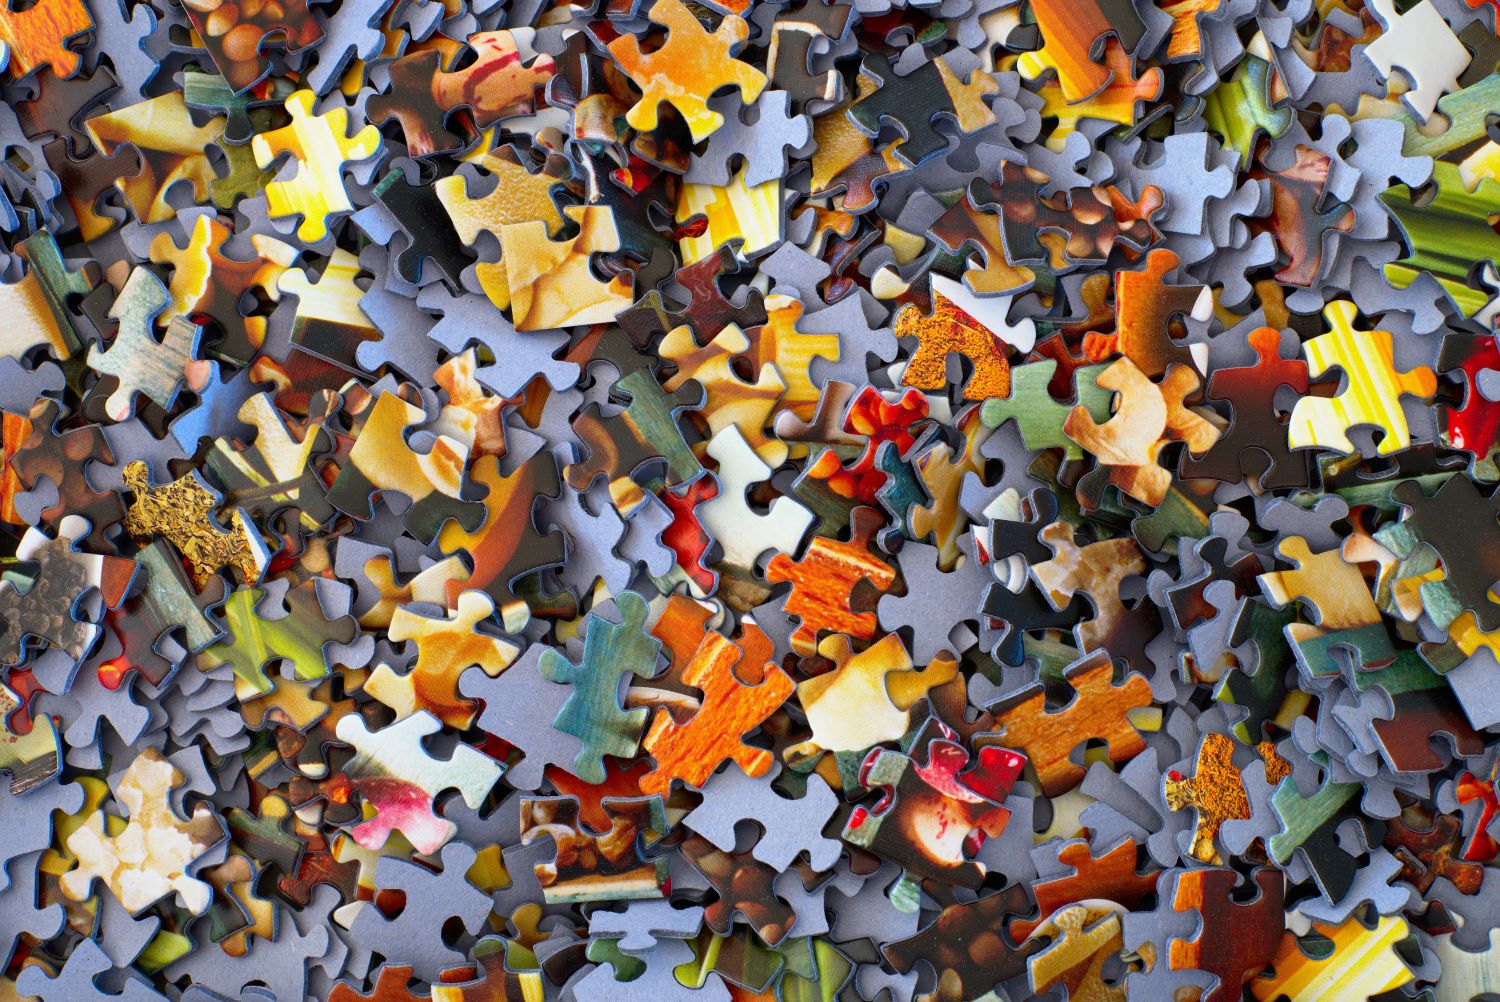 Jigsaw pieces in a pile